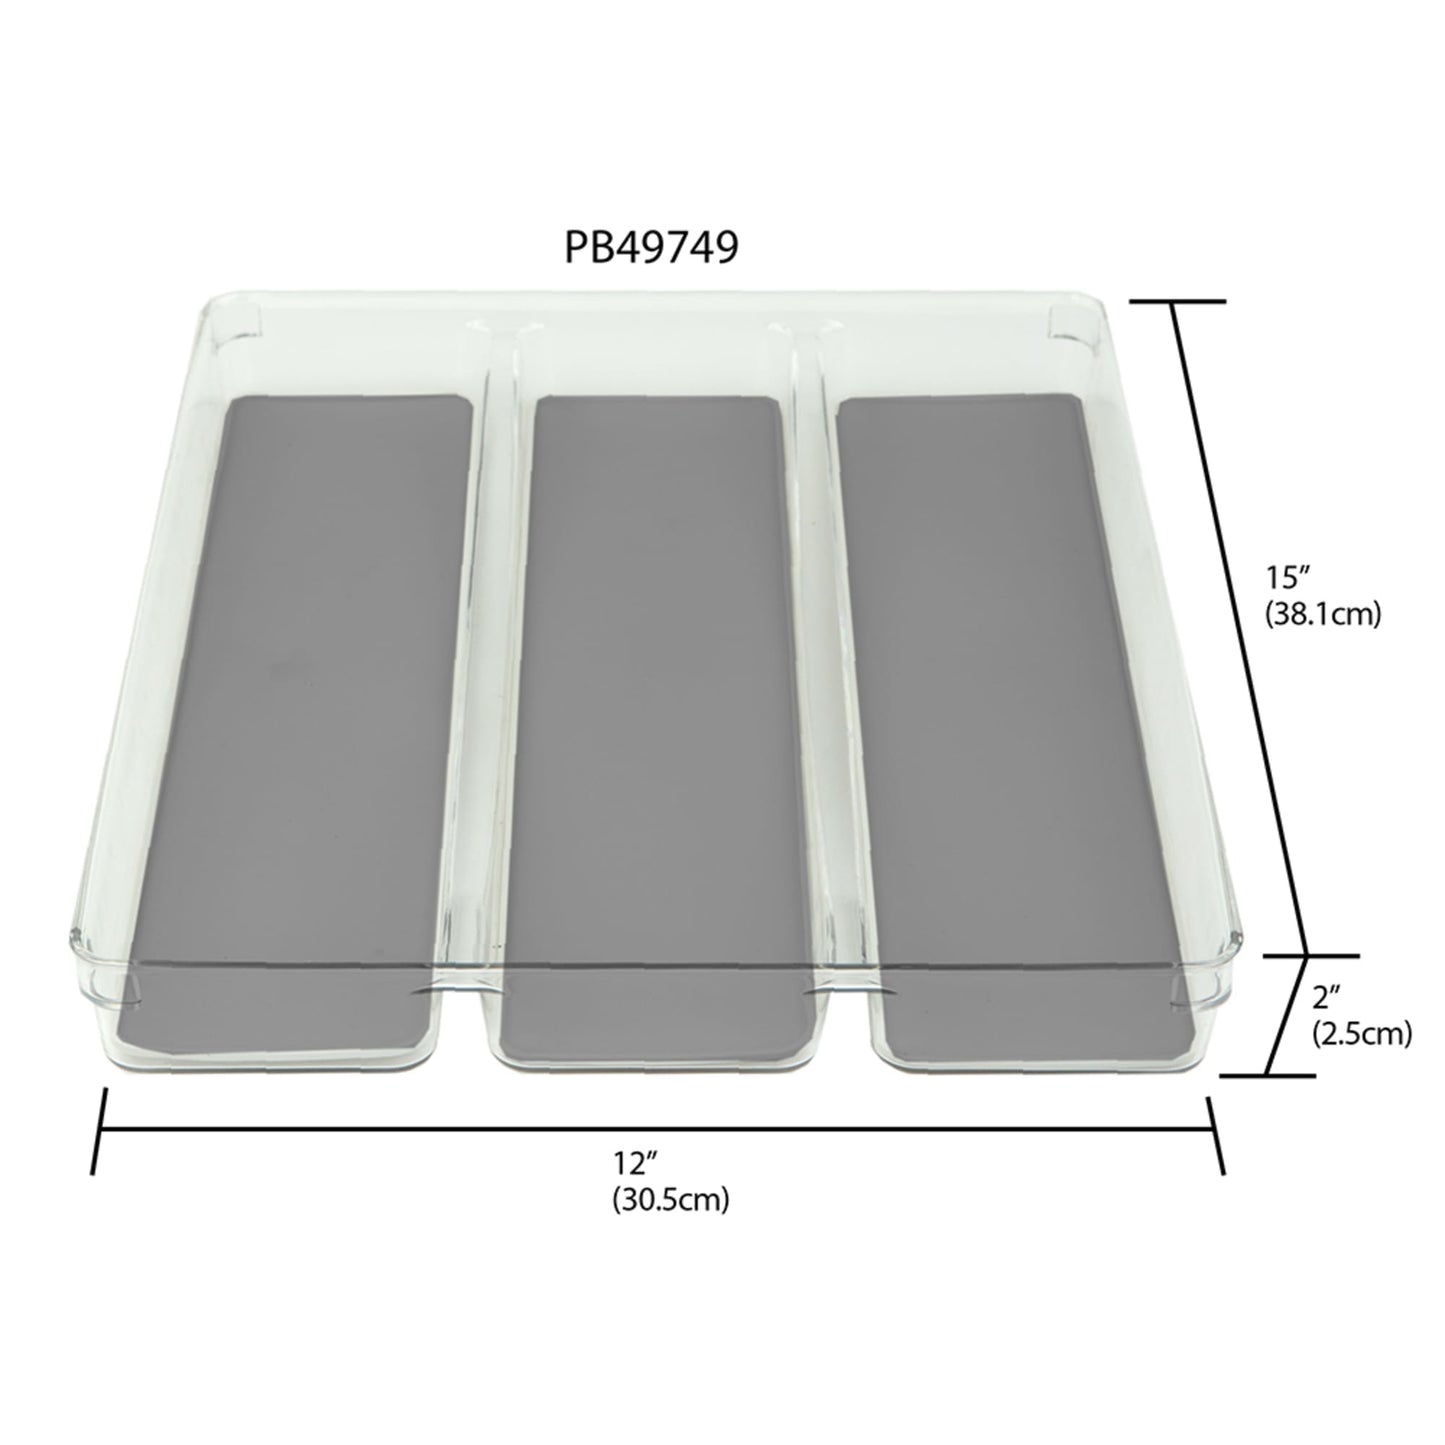 12" x 15" x 2"  Plastic Drawer Organizer with Rubber Liner